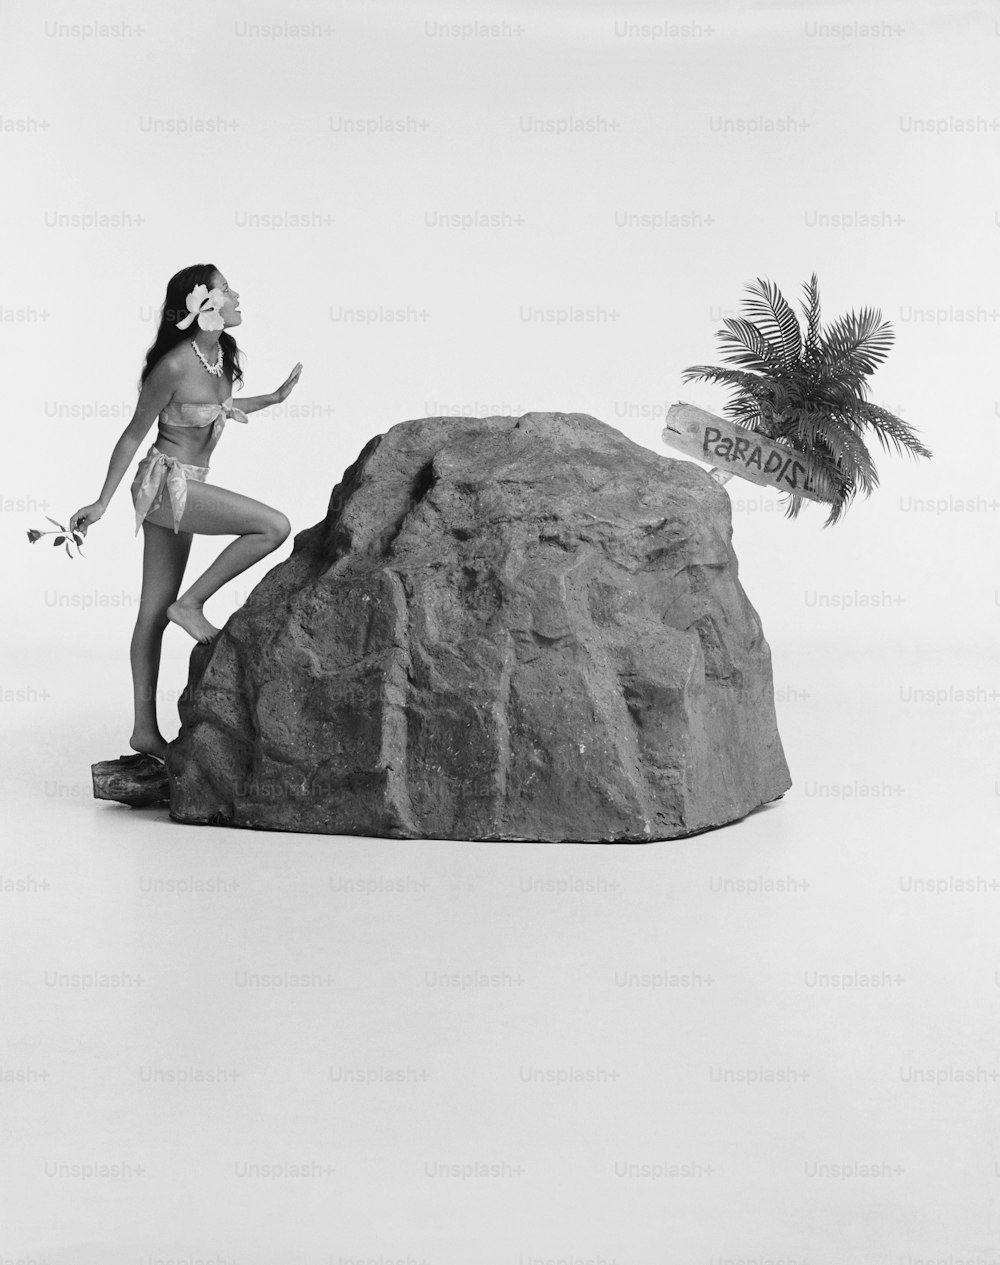 a woman in a bathing suit standing next to a rock